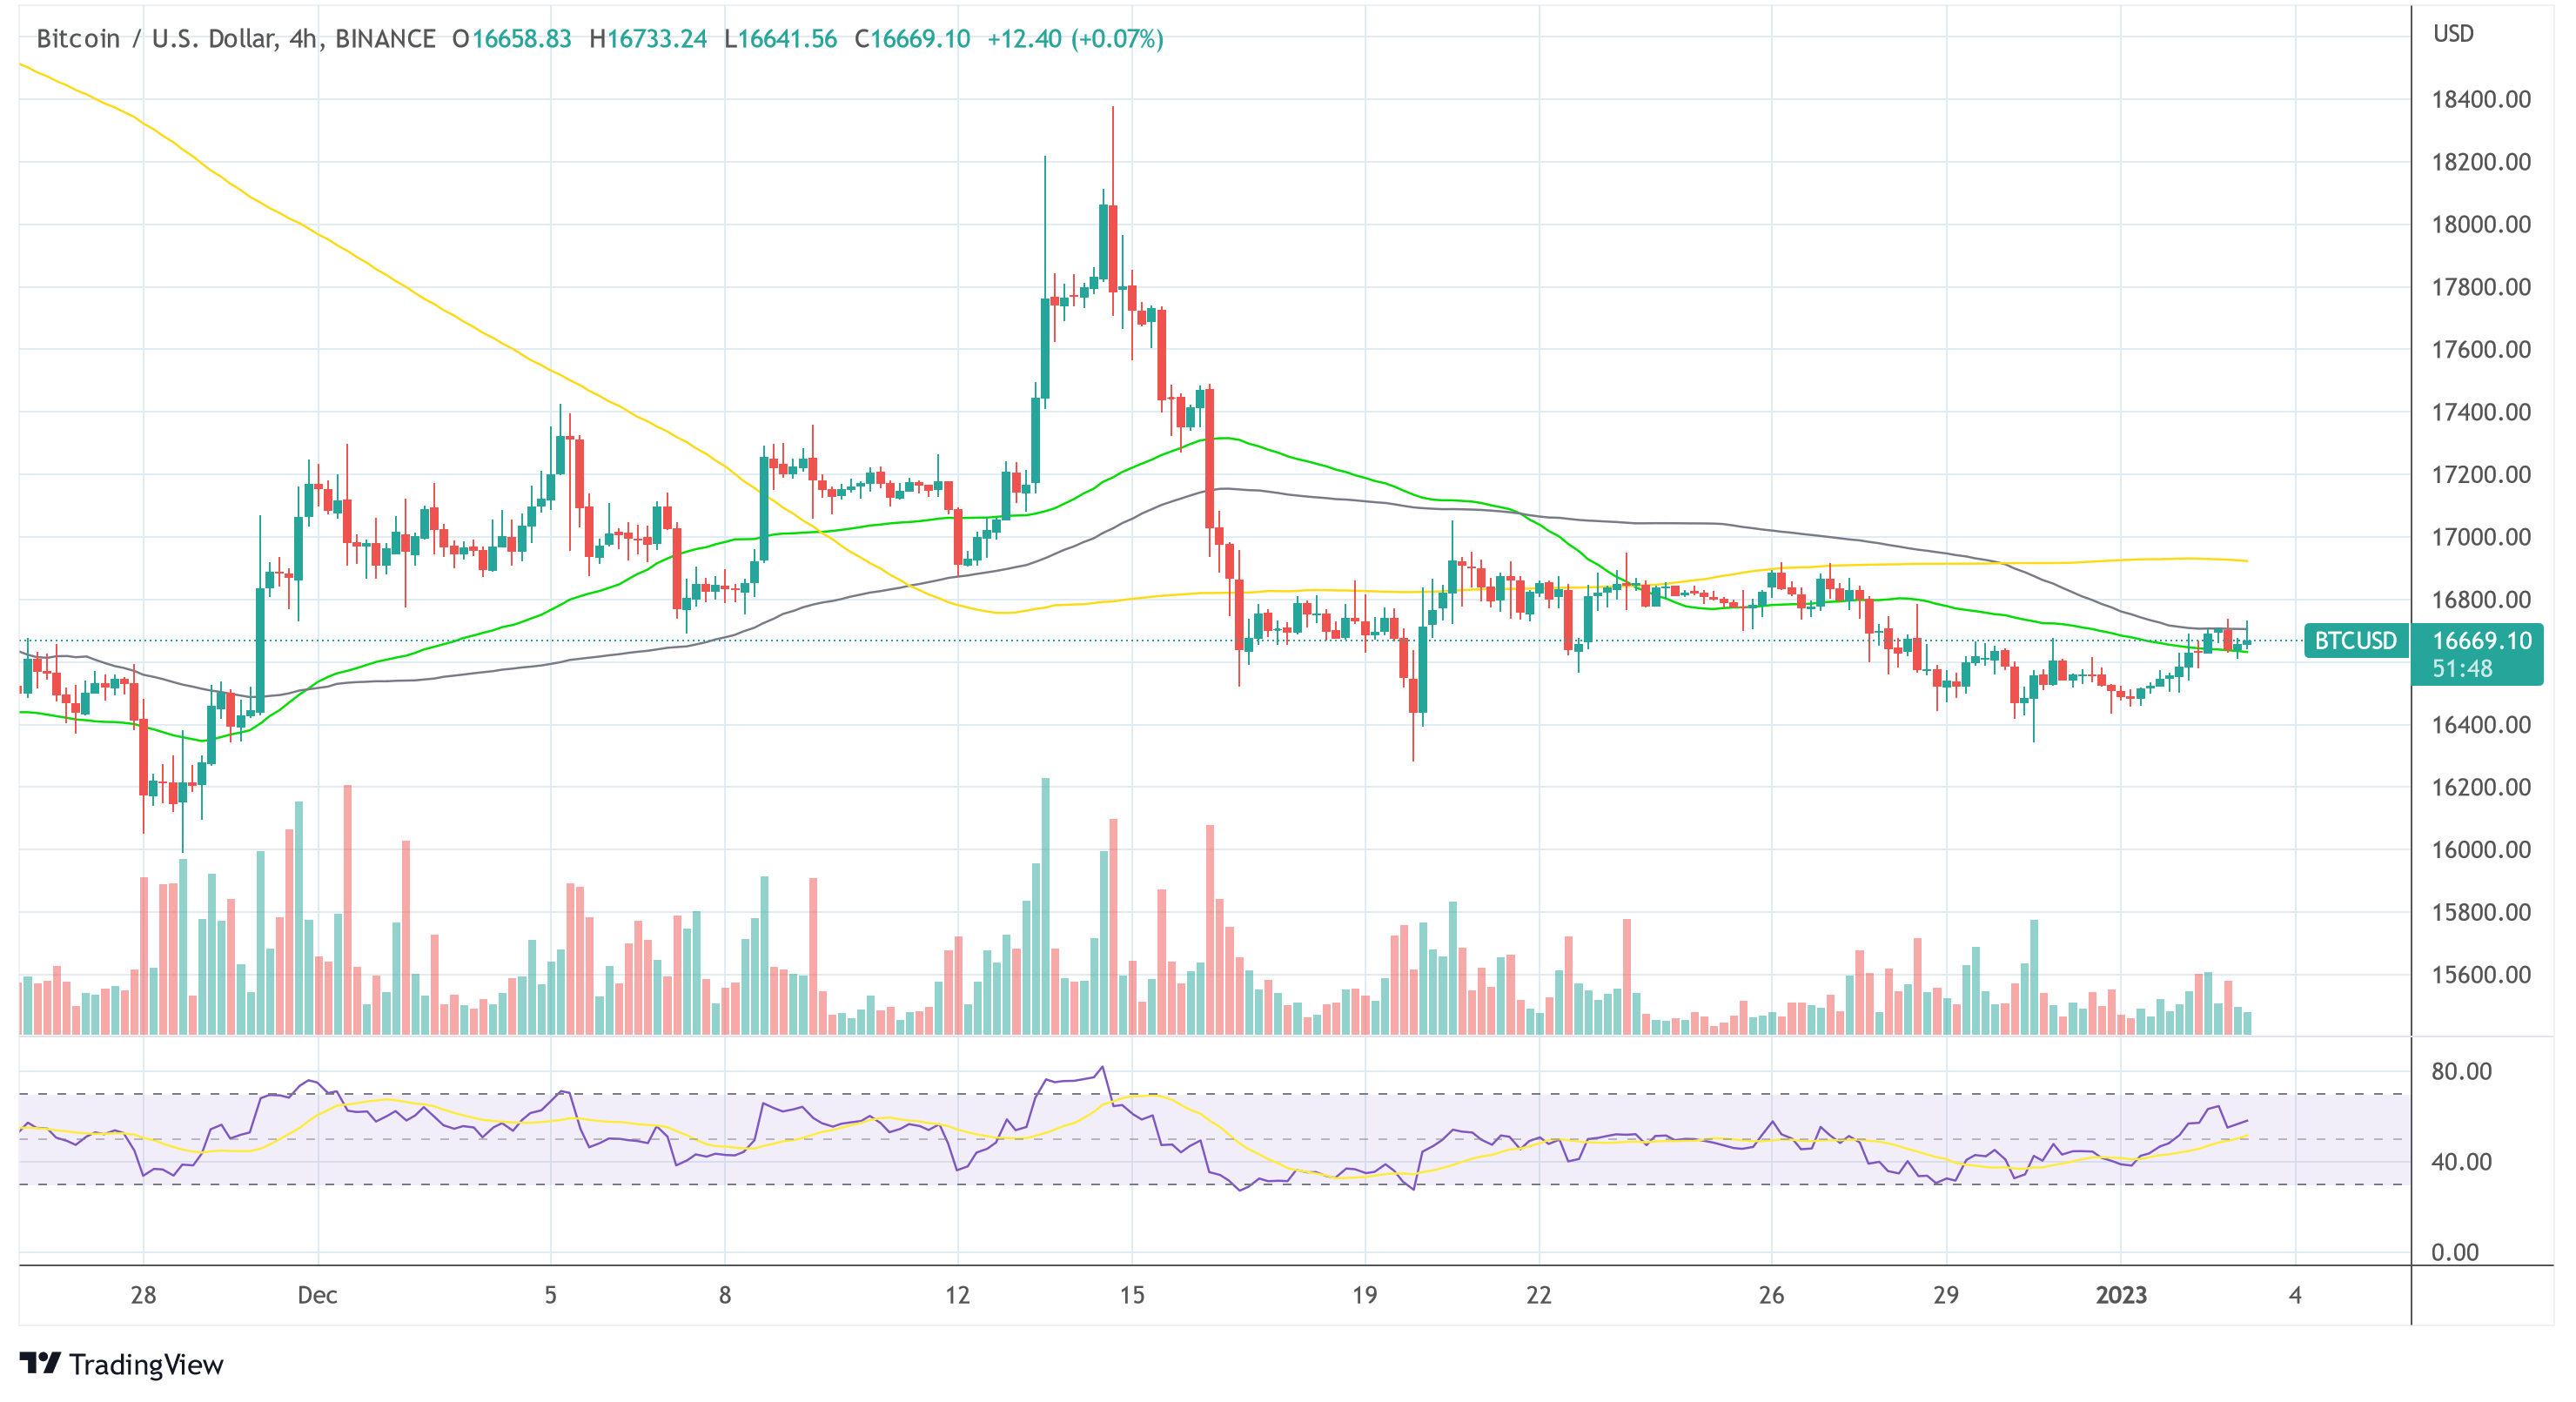 BTC facing another contagion moment by DCG?